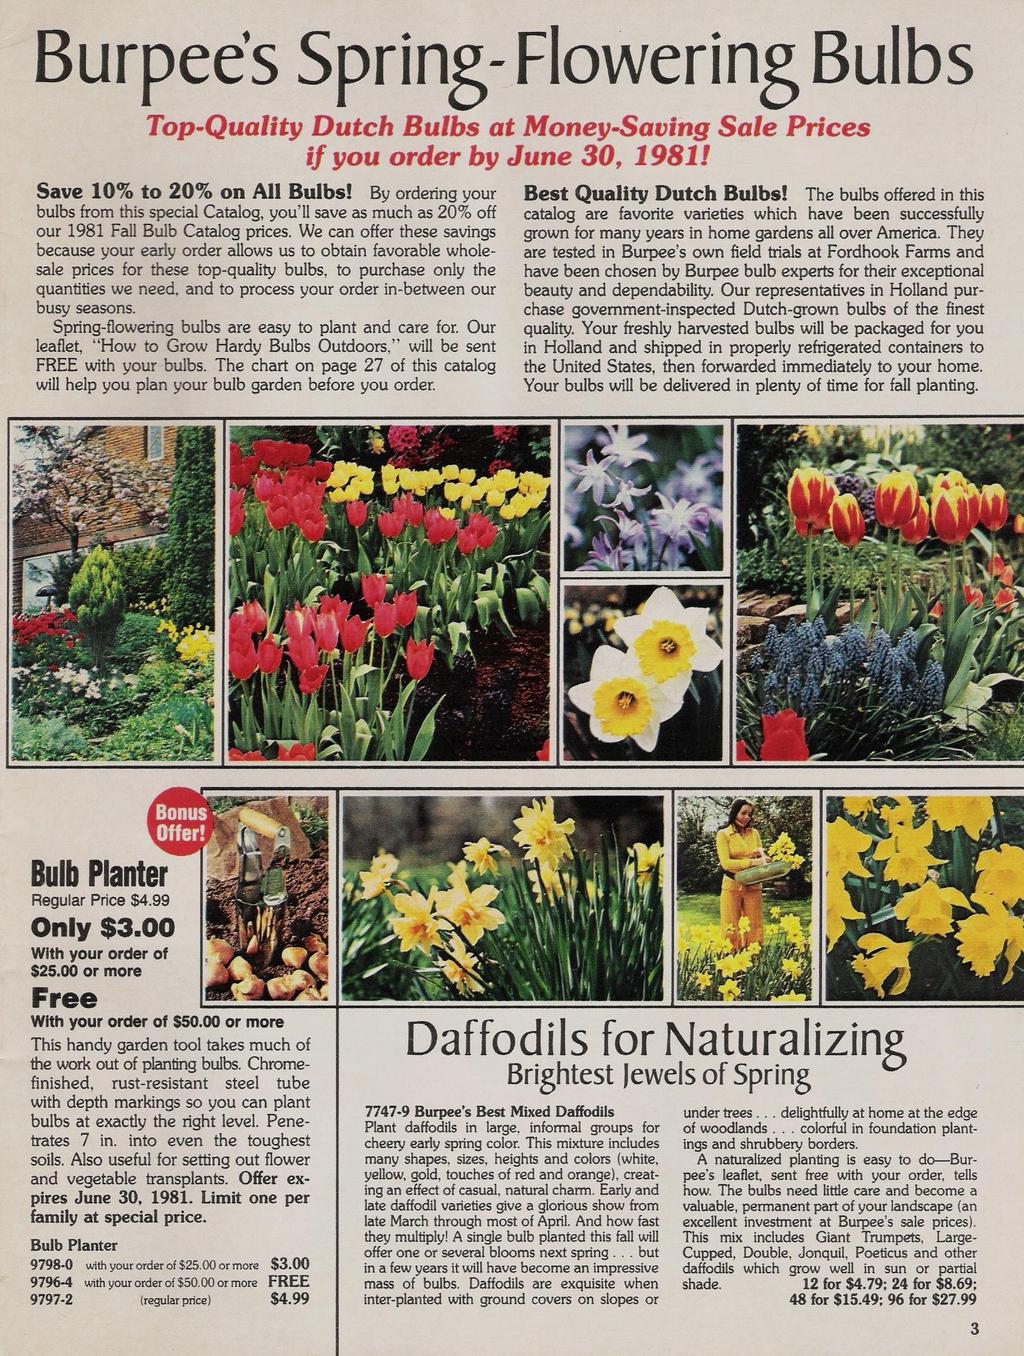 Burpee's Spring- Flowering Bulbs Top-Quality Dutch Bulbs at Money-Saving Sale Prices if you order by June 30, 1981! Save 10% to 20% on All Bulbs!